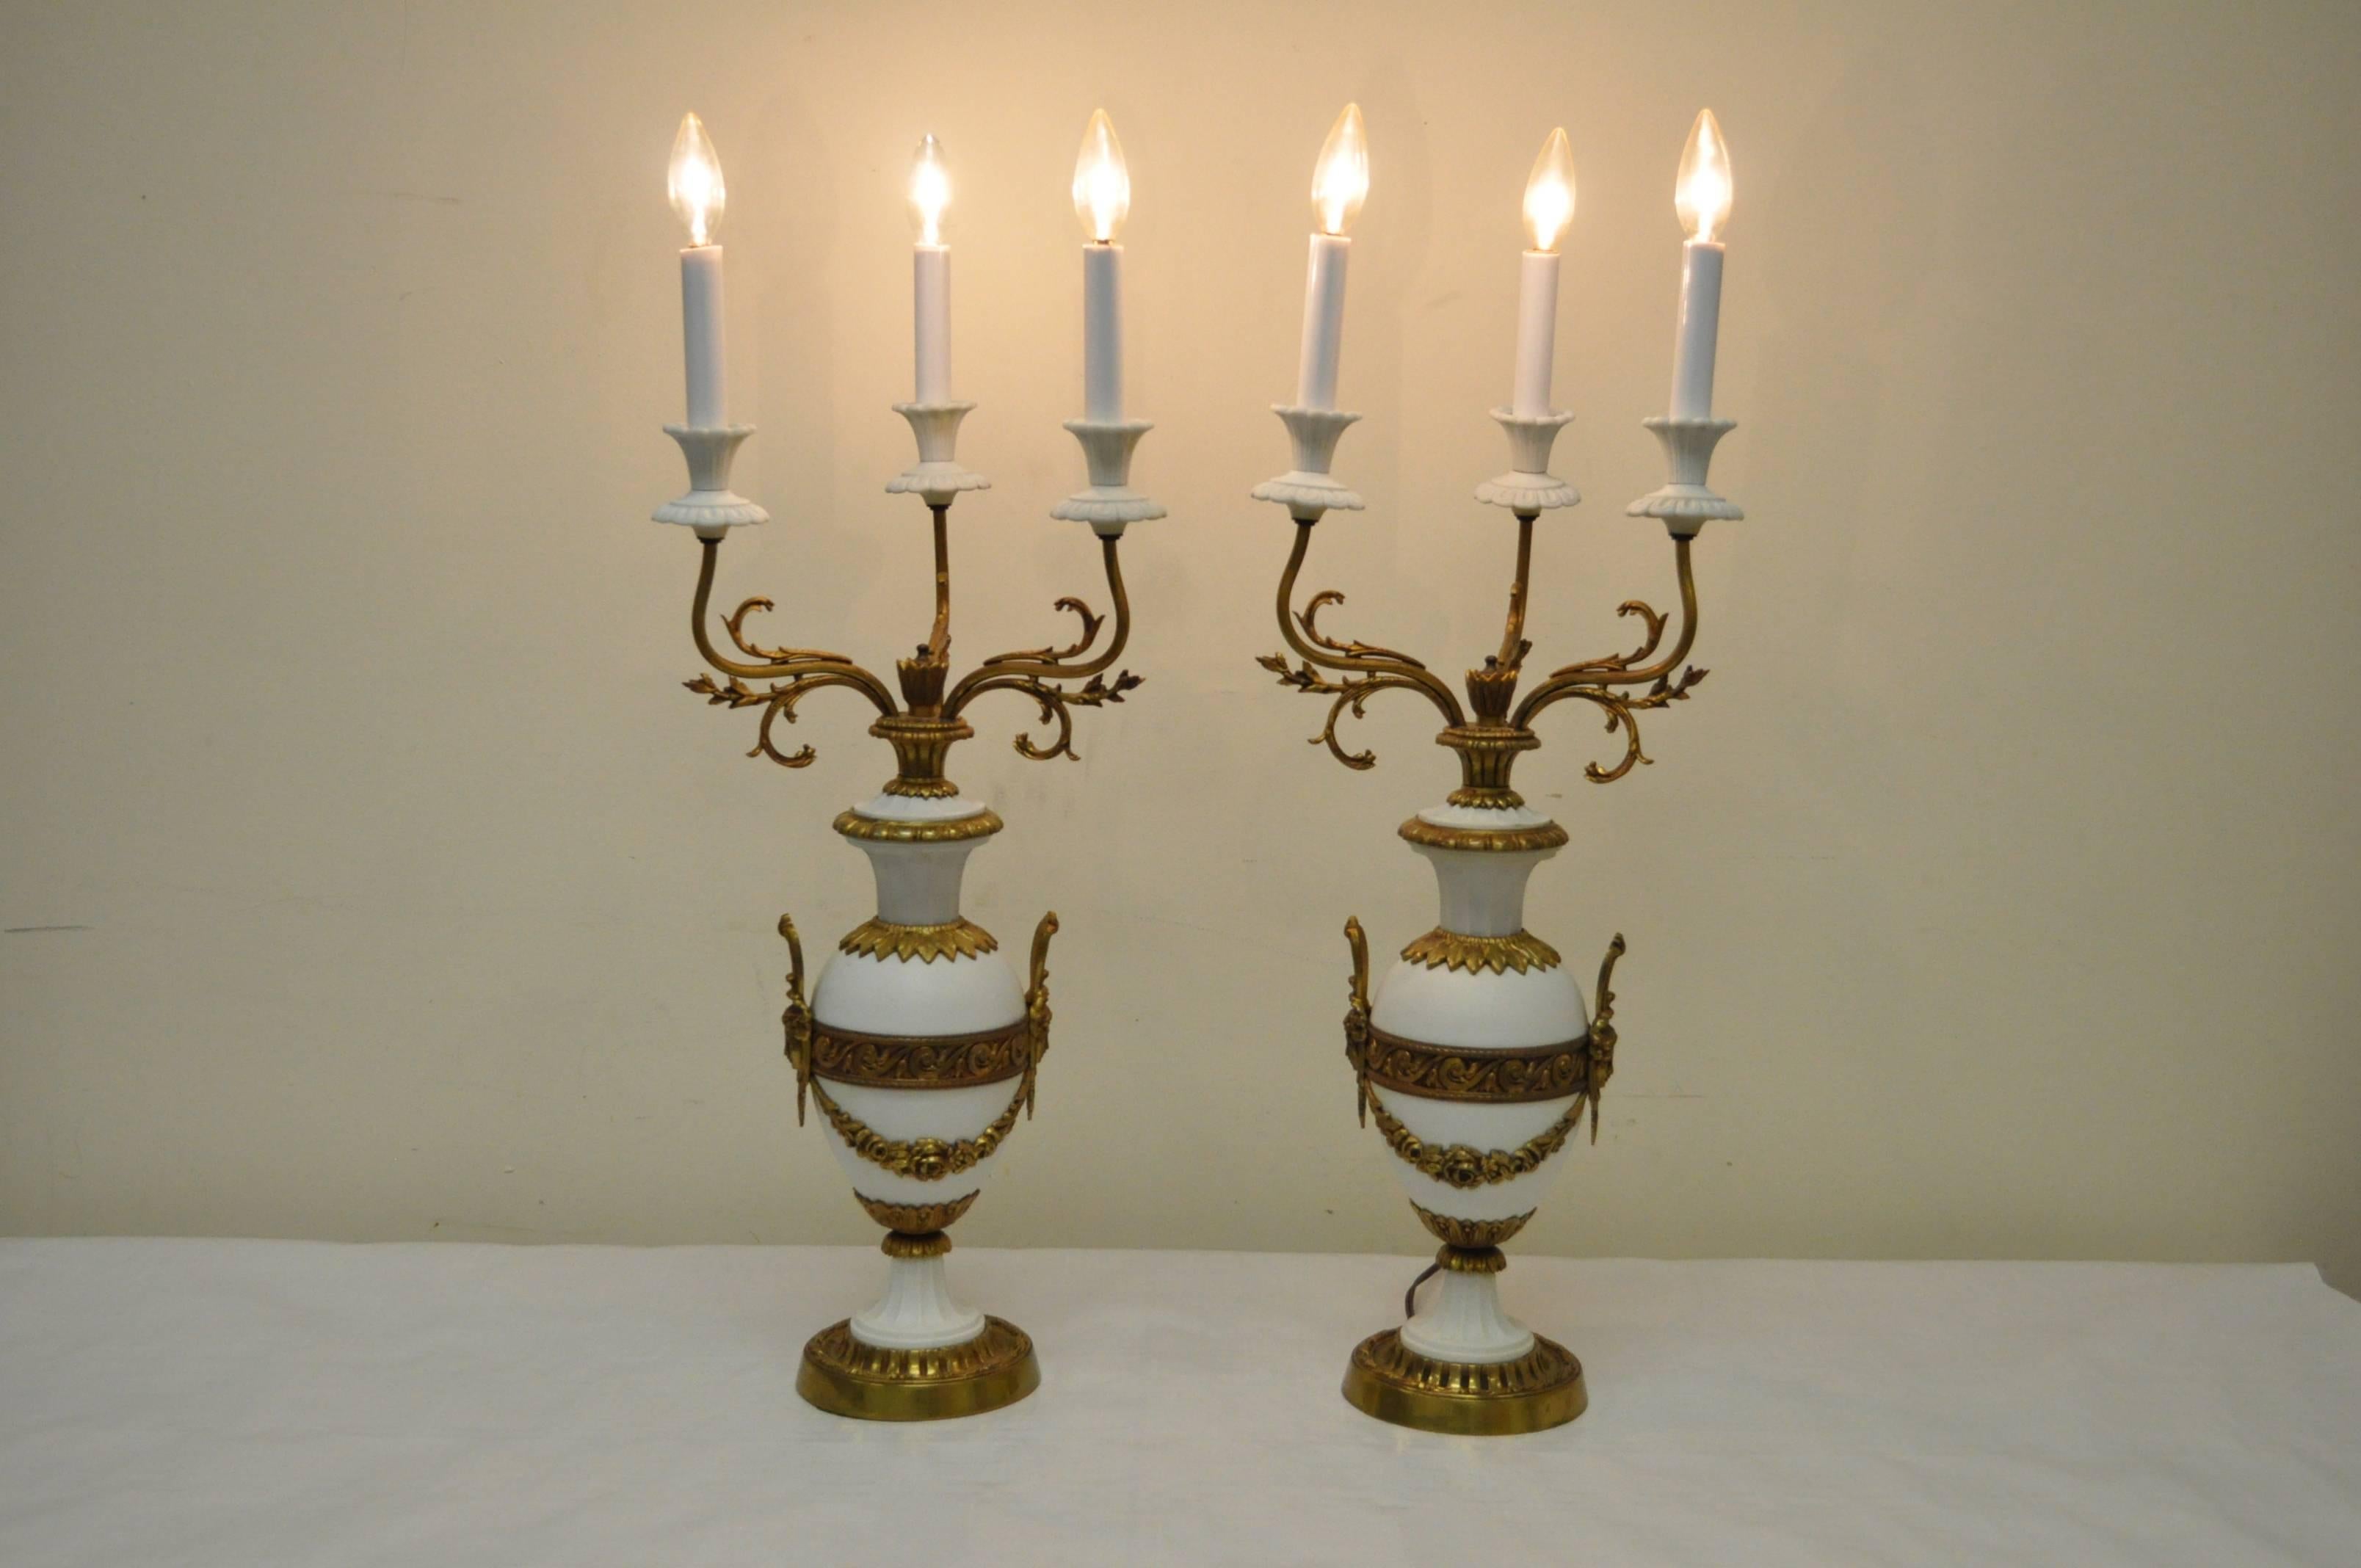 Elegant pair of French porcelain and bronze figural candelabra lamps in the Louis XV / XVI taste. Lamps feature floral drapes, maiden faces, three lights each and classy form. Marked 